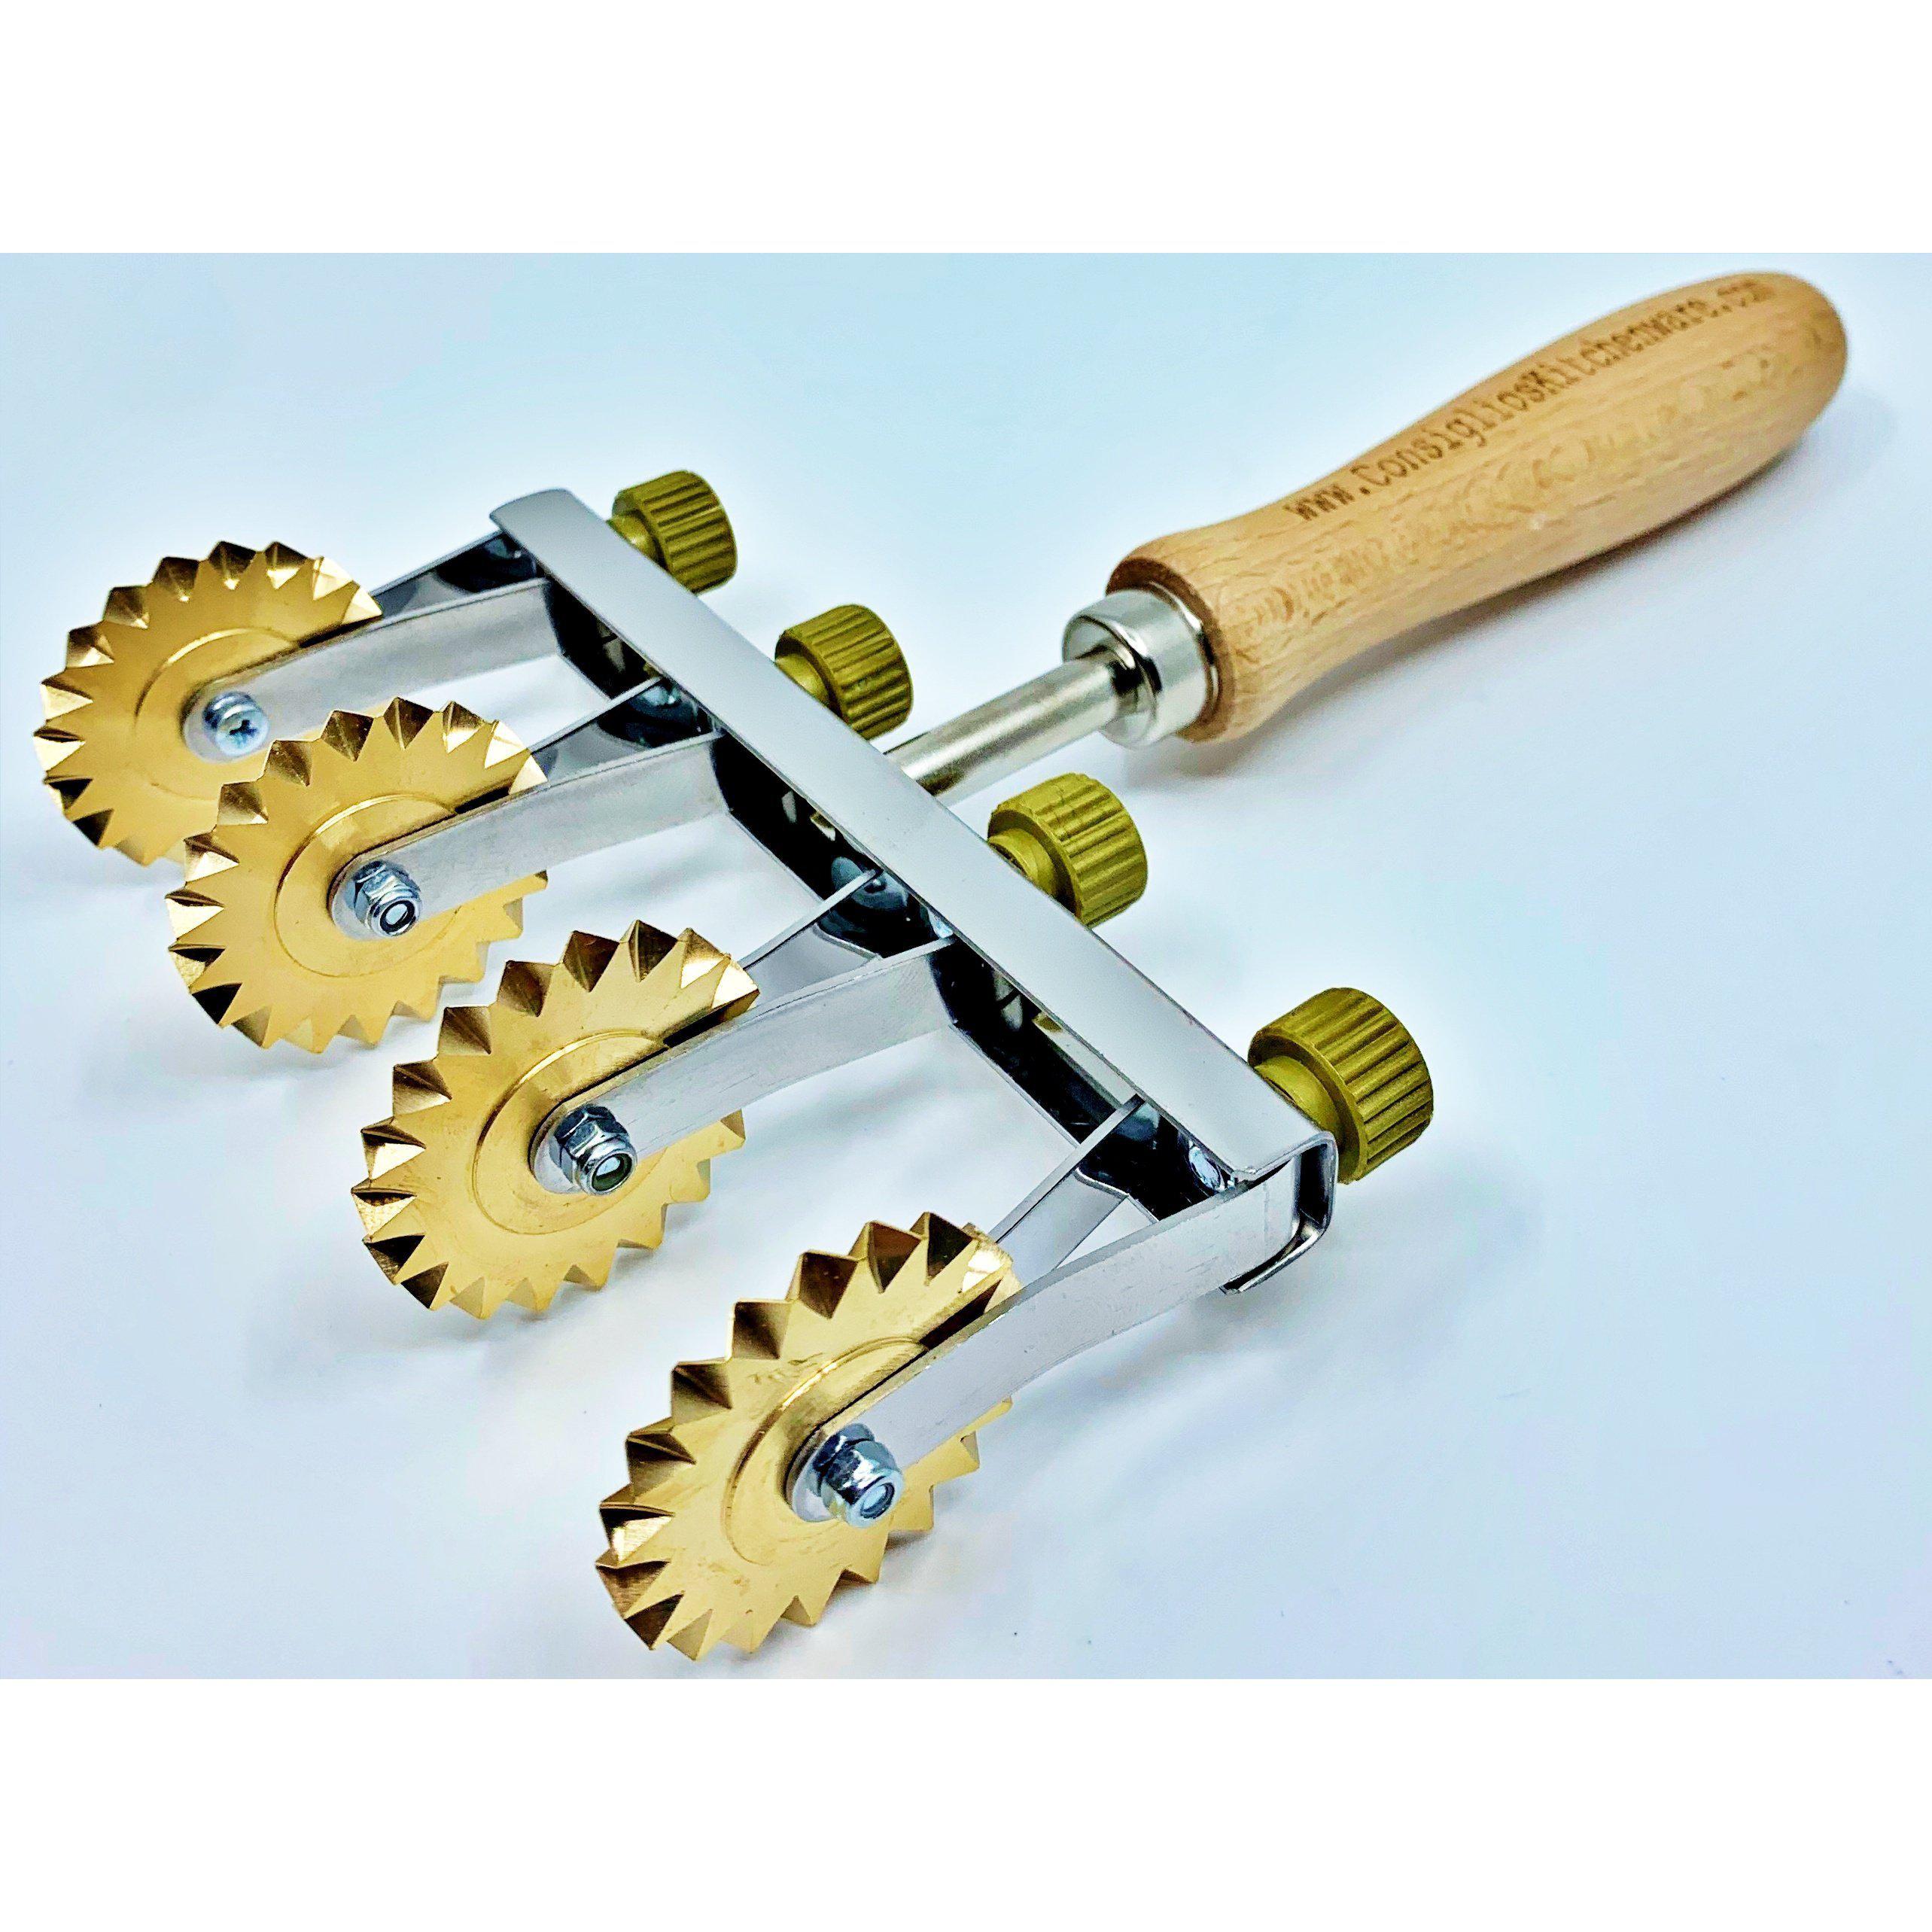 Brass Adjustable Fluted Pastry and Pasta Cutter with 4 Wheels